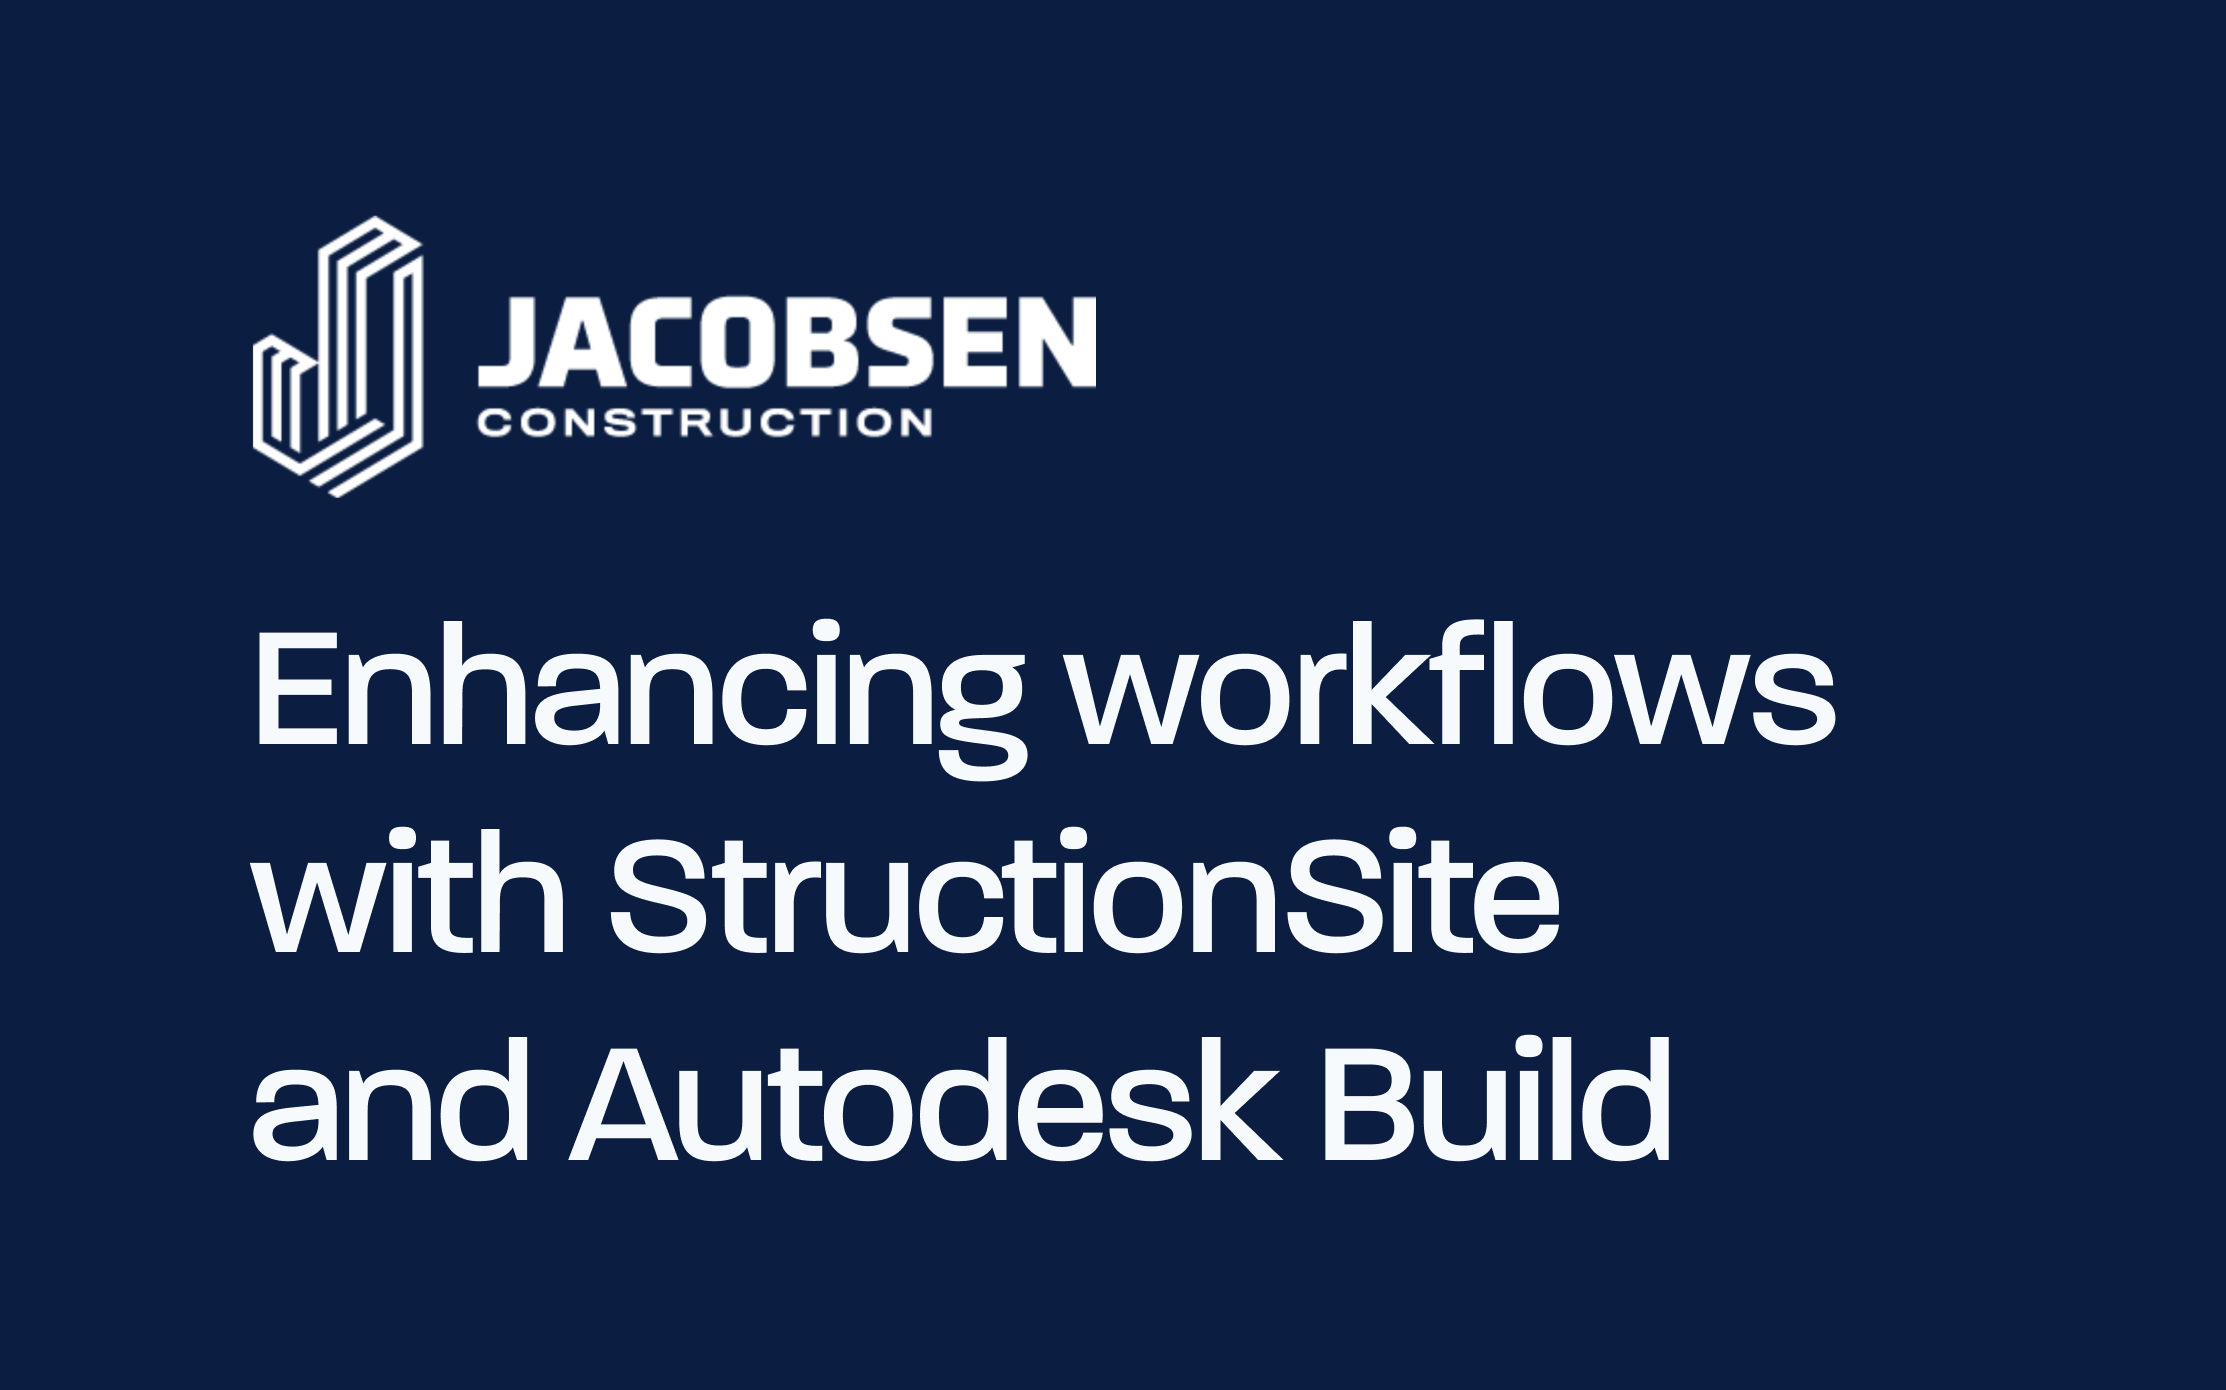 Enhancing workflows with StructionSite and Autodesk Build